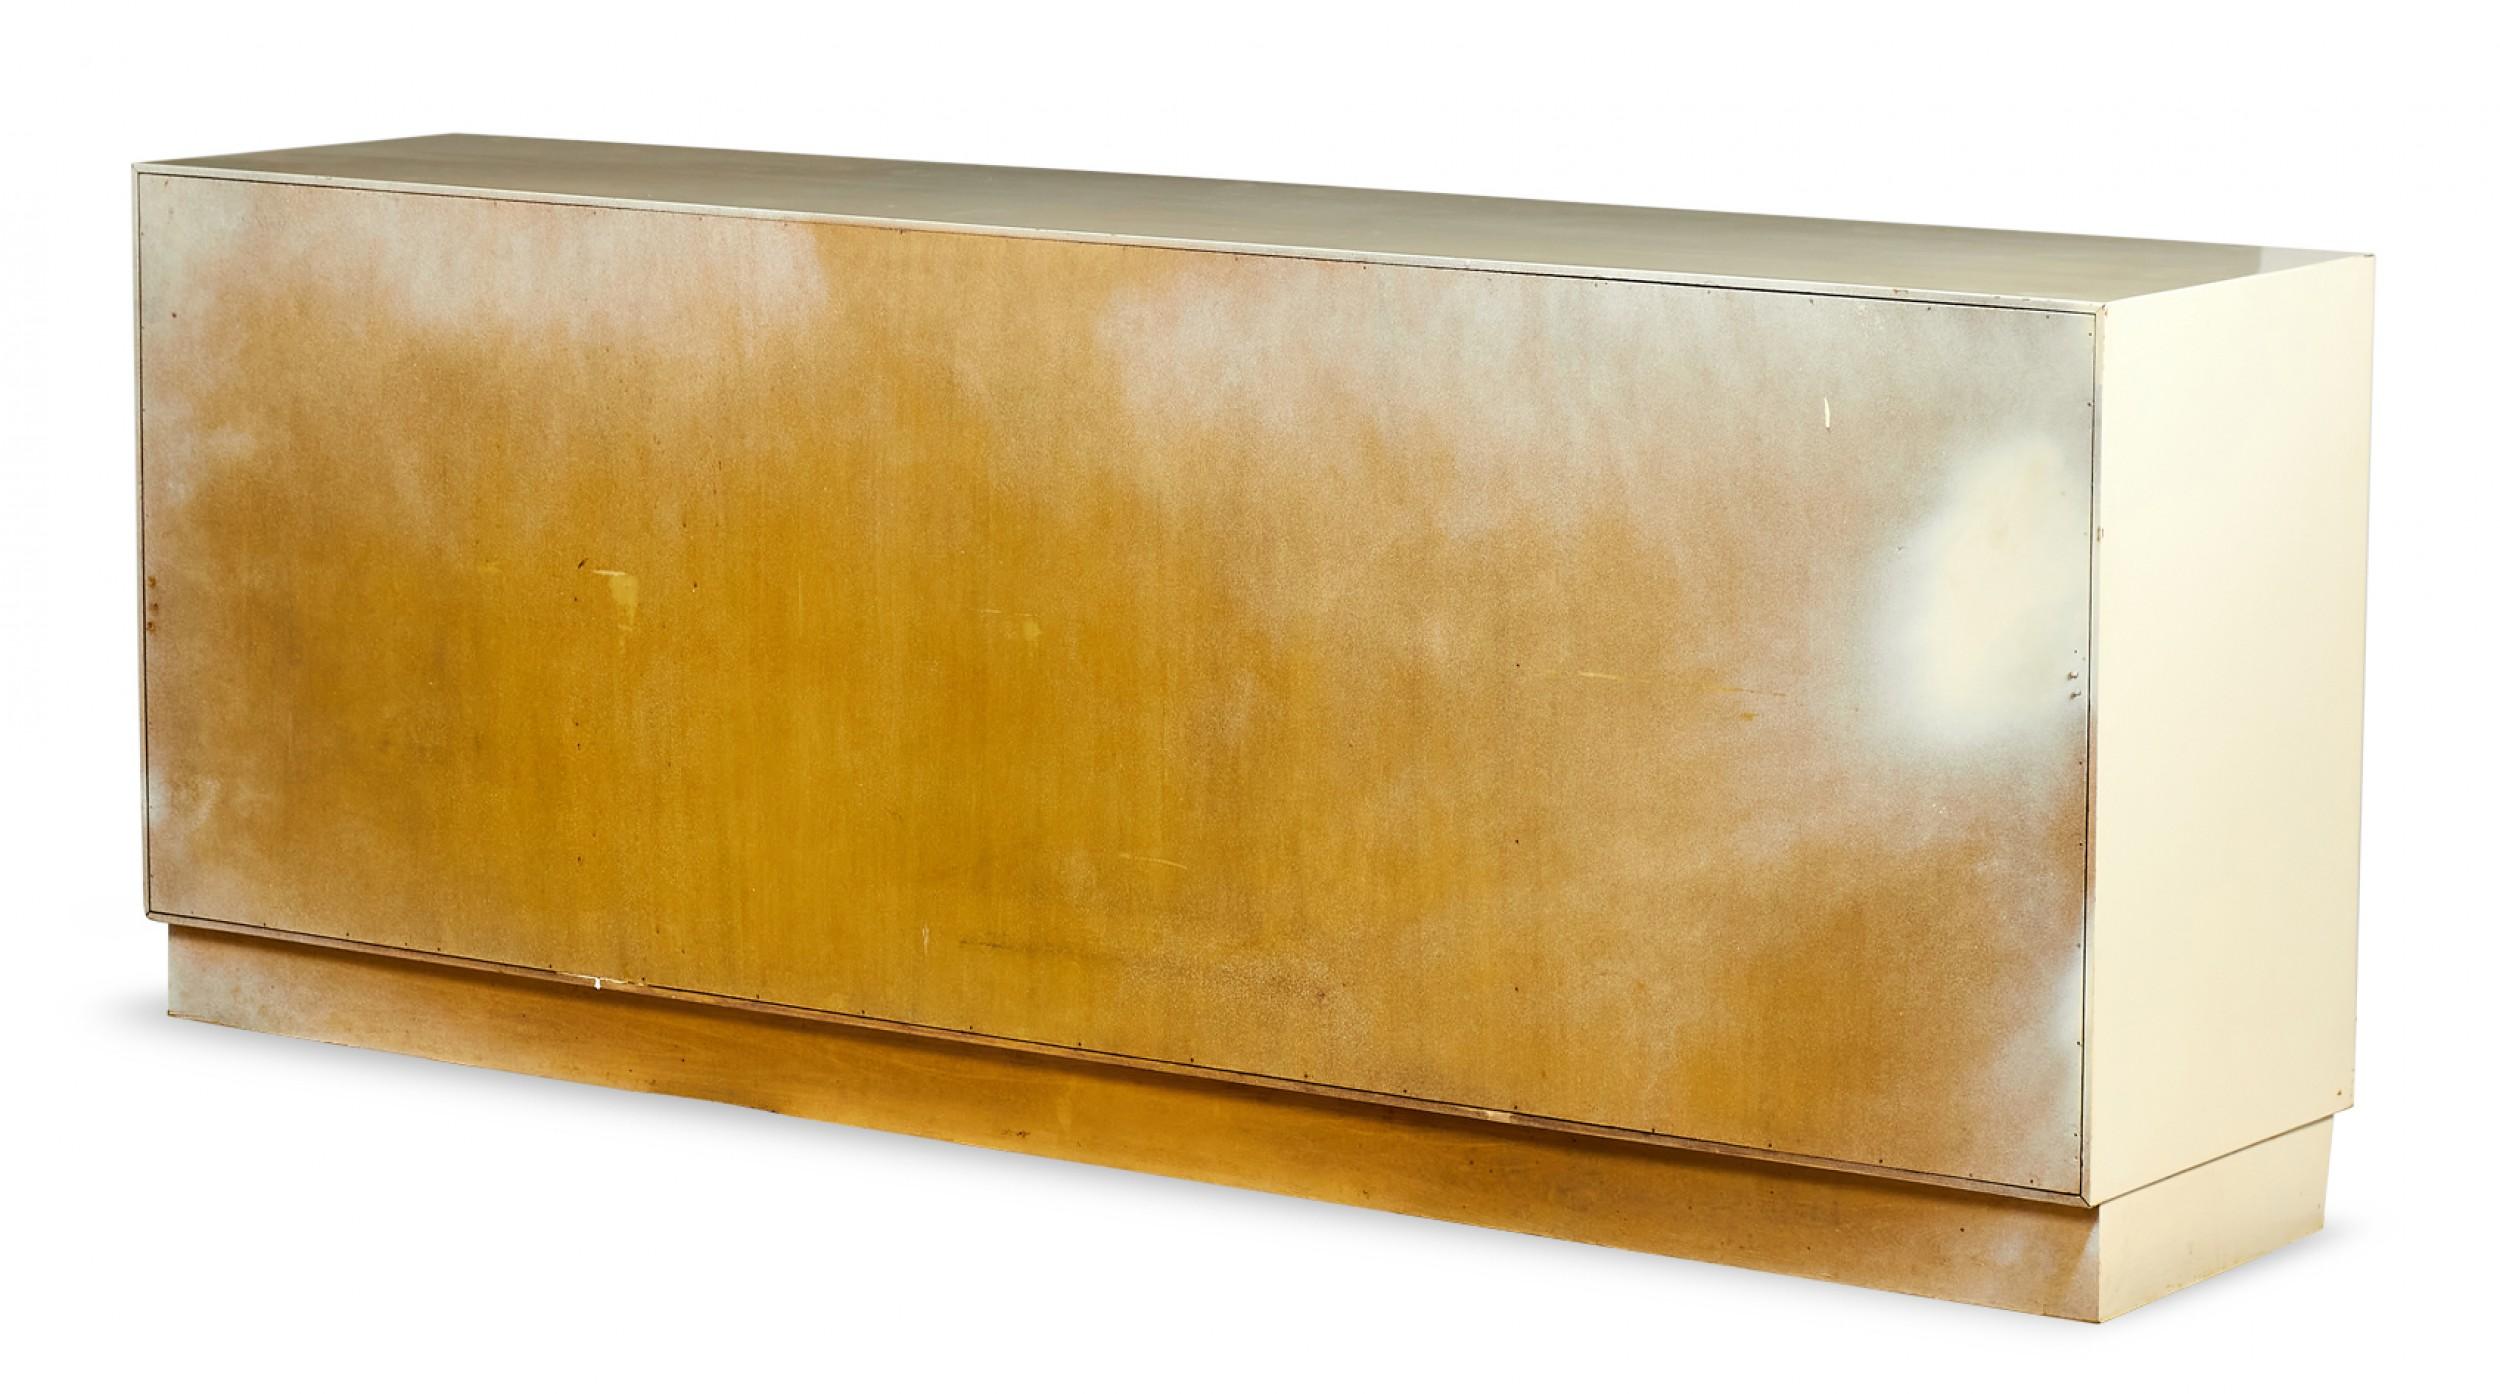 20th Century Edward Wormley for Dunbar Furniture Woven Front White Painted Credenza For Sale